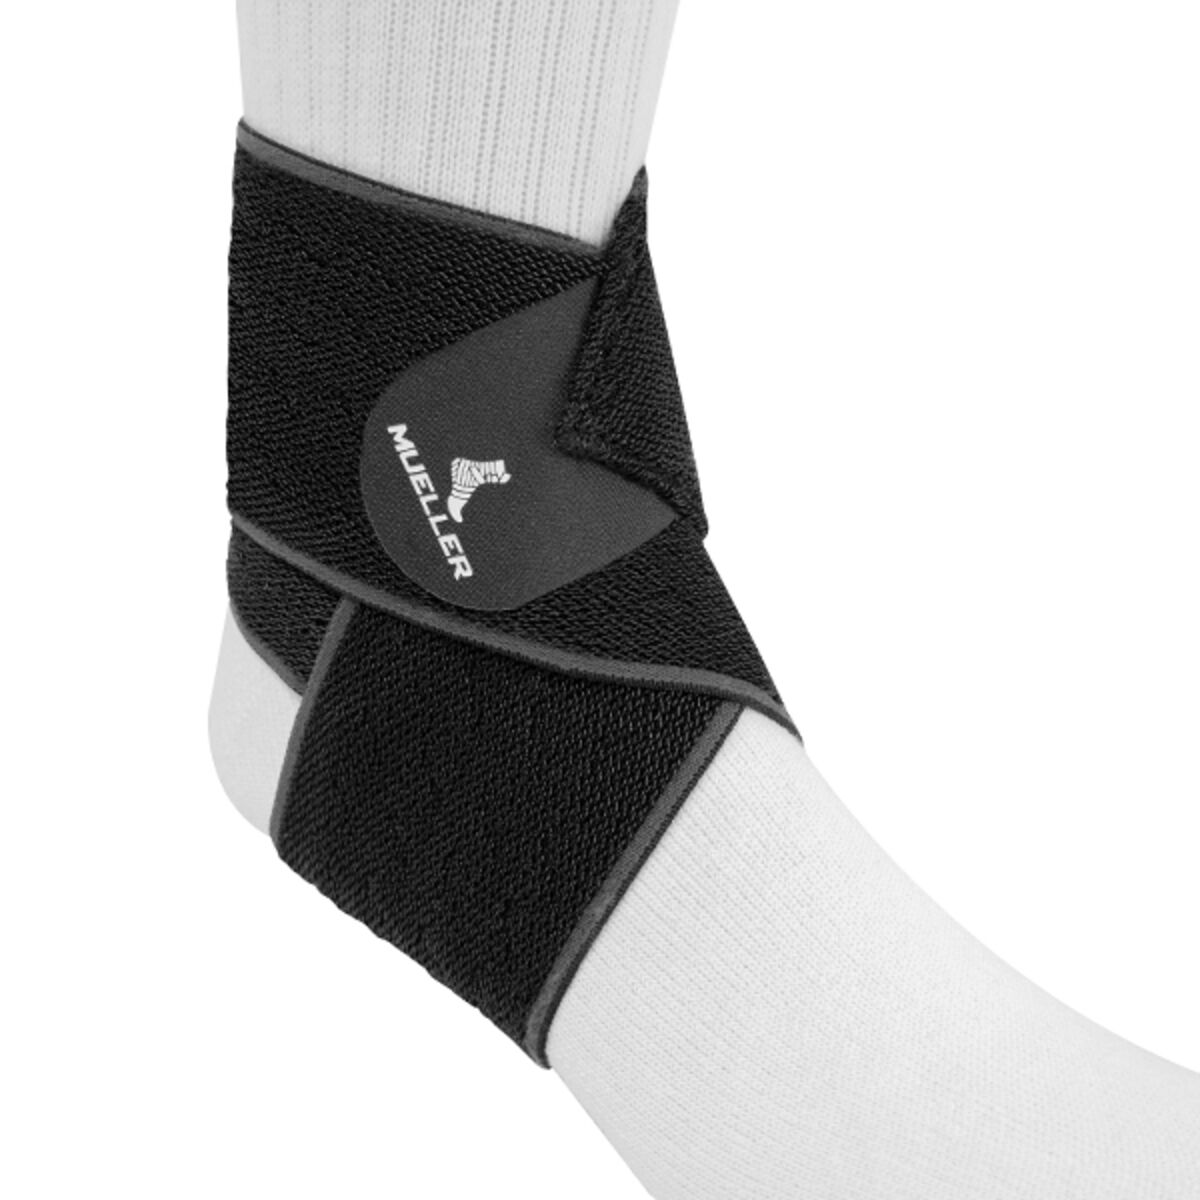 EASYGRIP ANKLE WRAP BLK OSFM | Ankle Braces & Supports | By Body Part ...